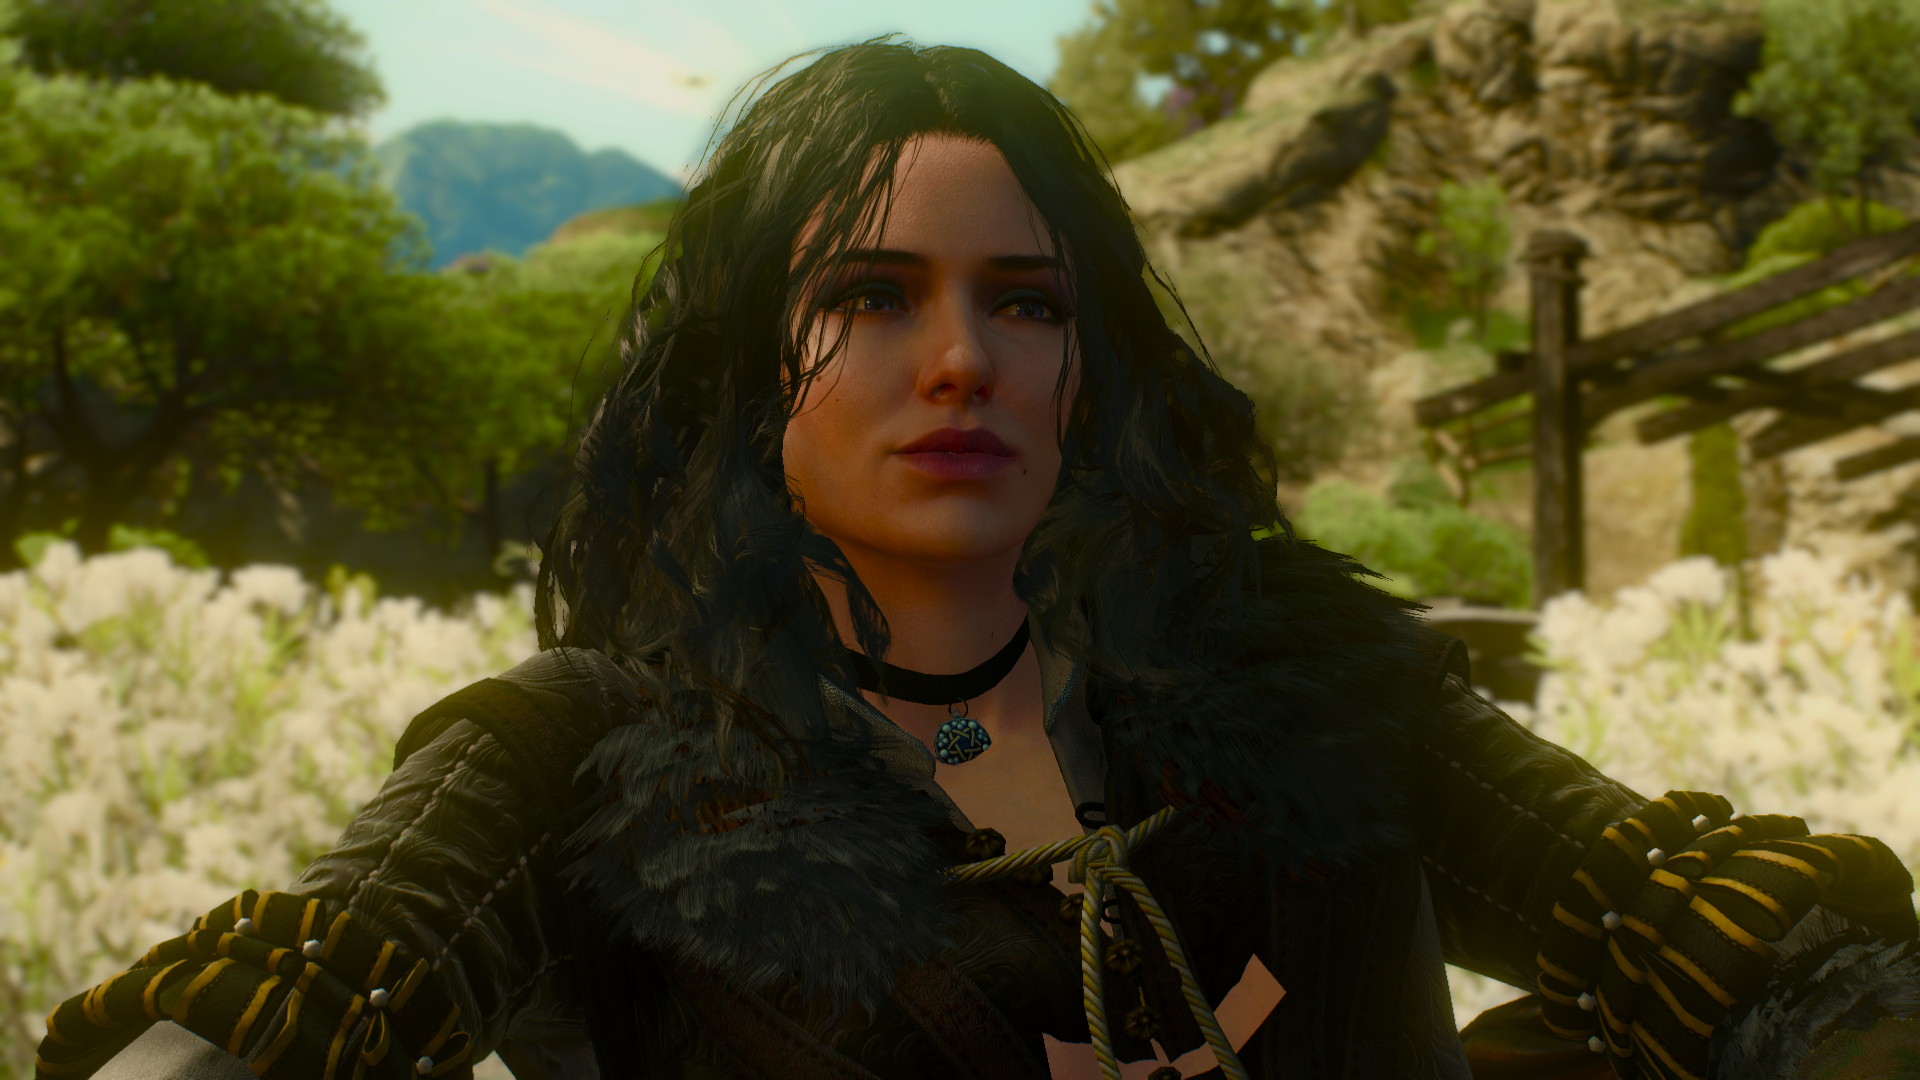 General 1920x1080 The Witcher 3: Wild Hunt video games The Witcher Yennefer of Vengerberg The Witcher 3: Wild Hunt - Blood and Wine CD Projekt RED video game characters